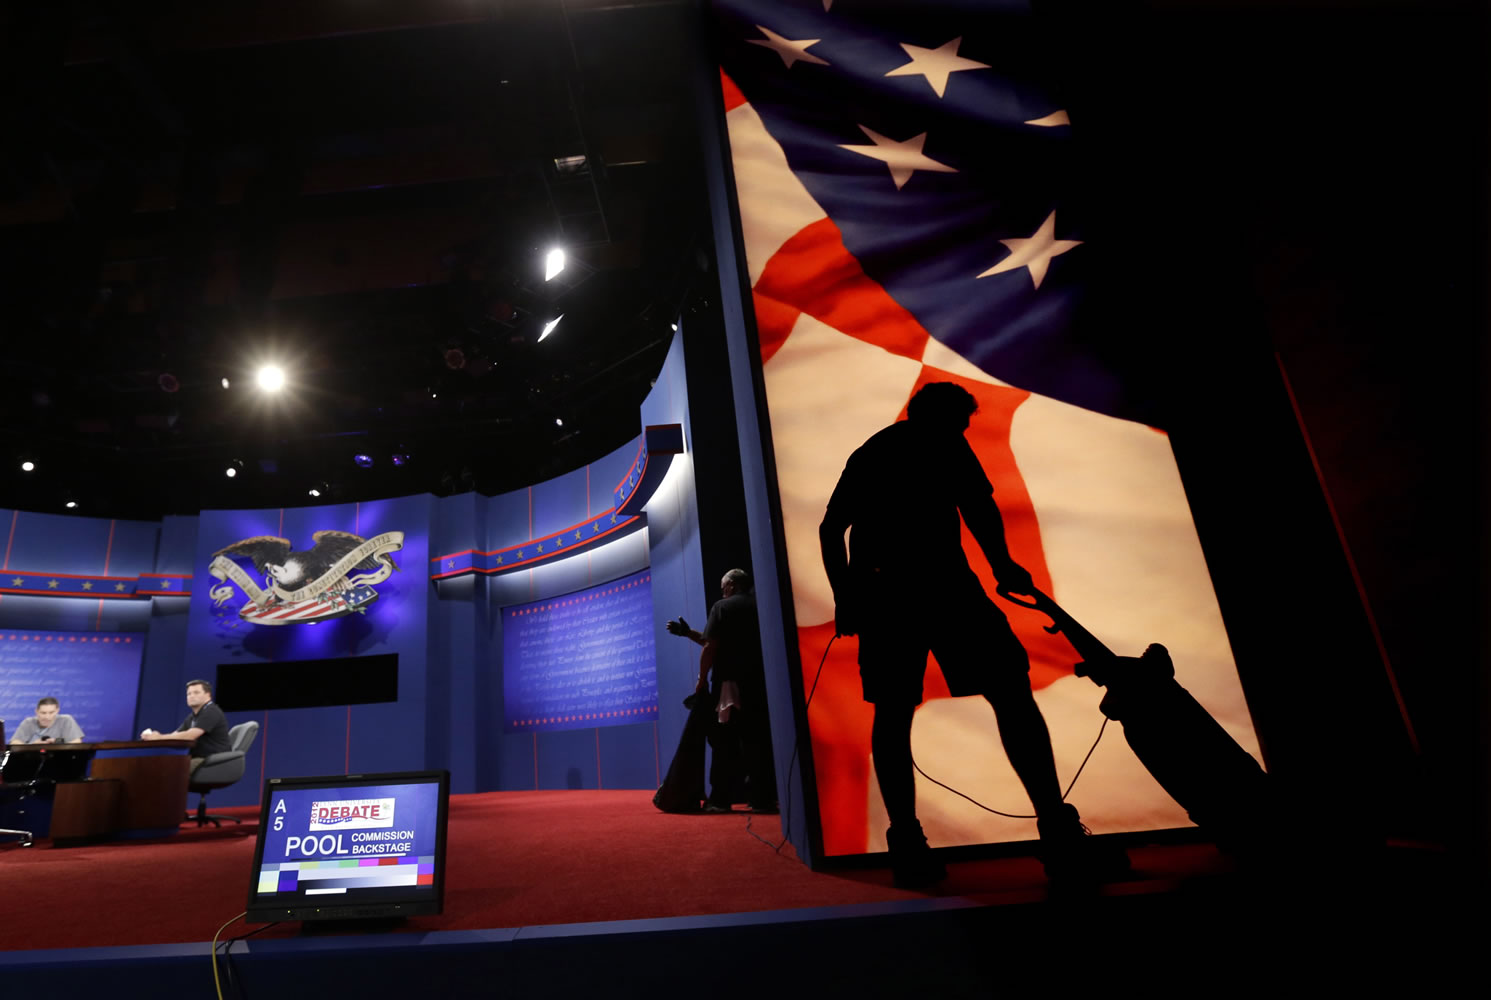 A worker vacuums as the set for tonight's presidential debate between President Barack Obama and Republican presidential candidate Mitt Romney is prepared Sunday in Boca Raton, Fla.